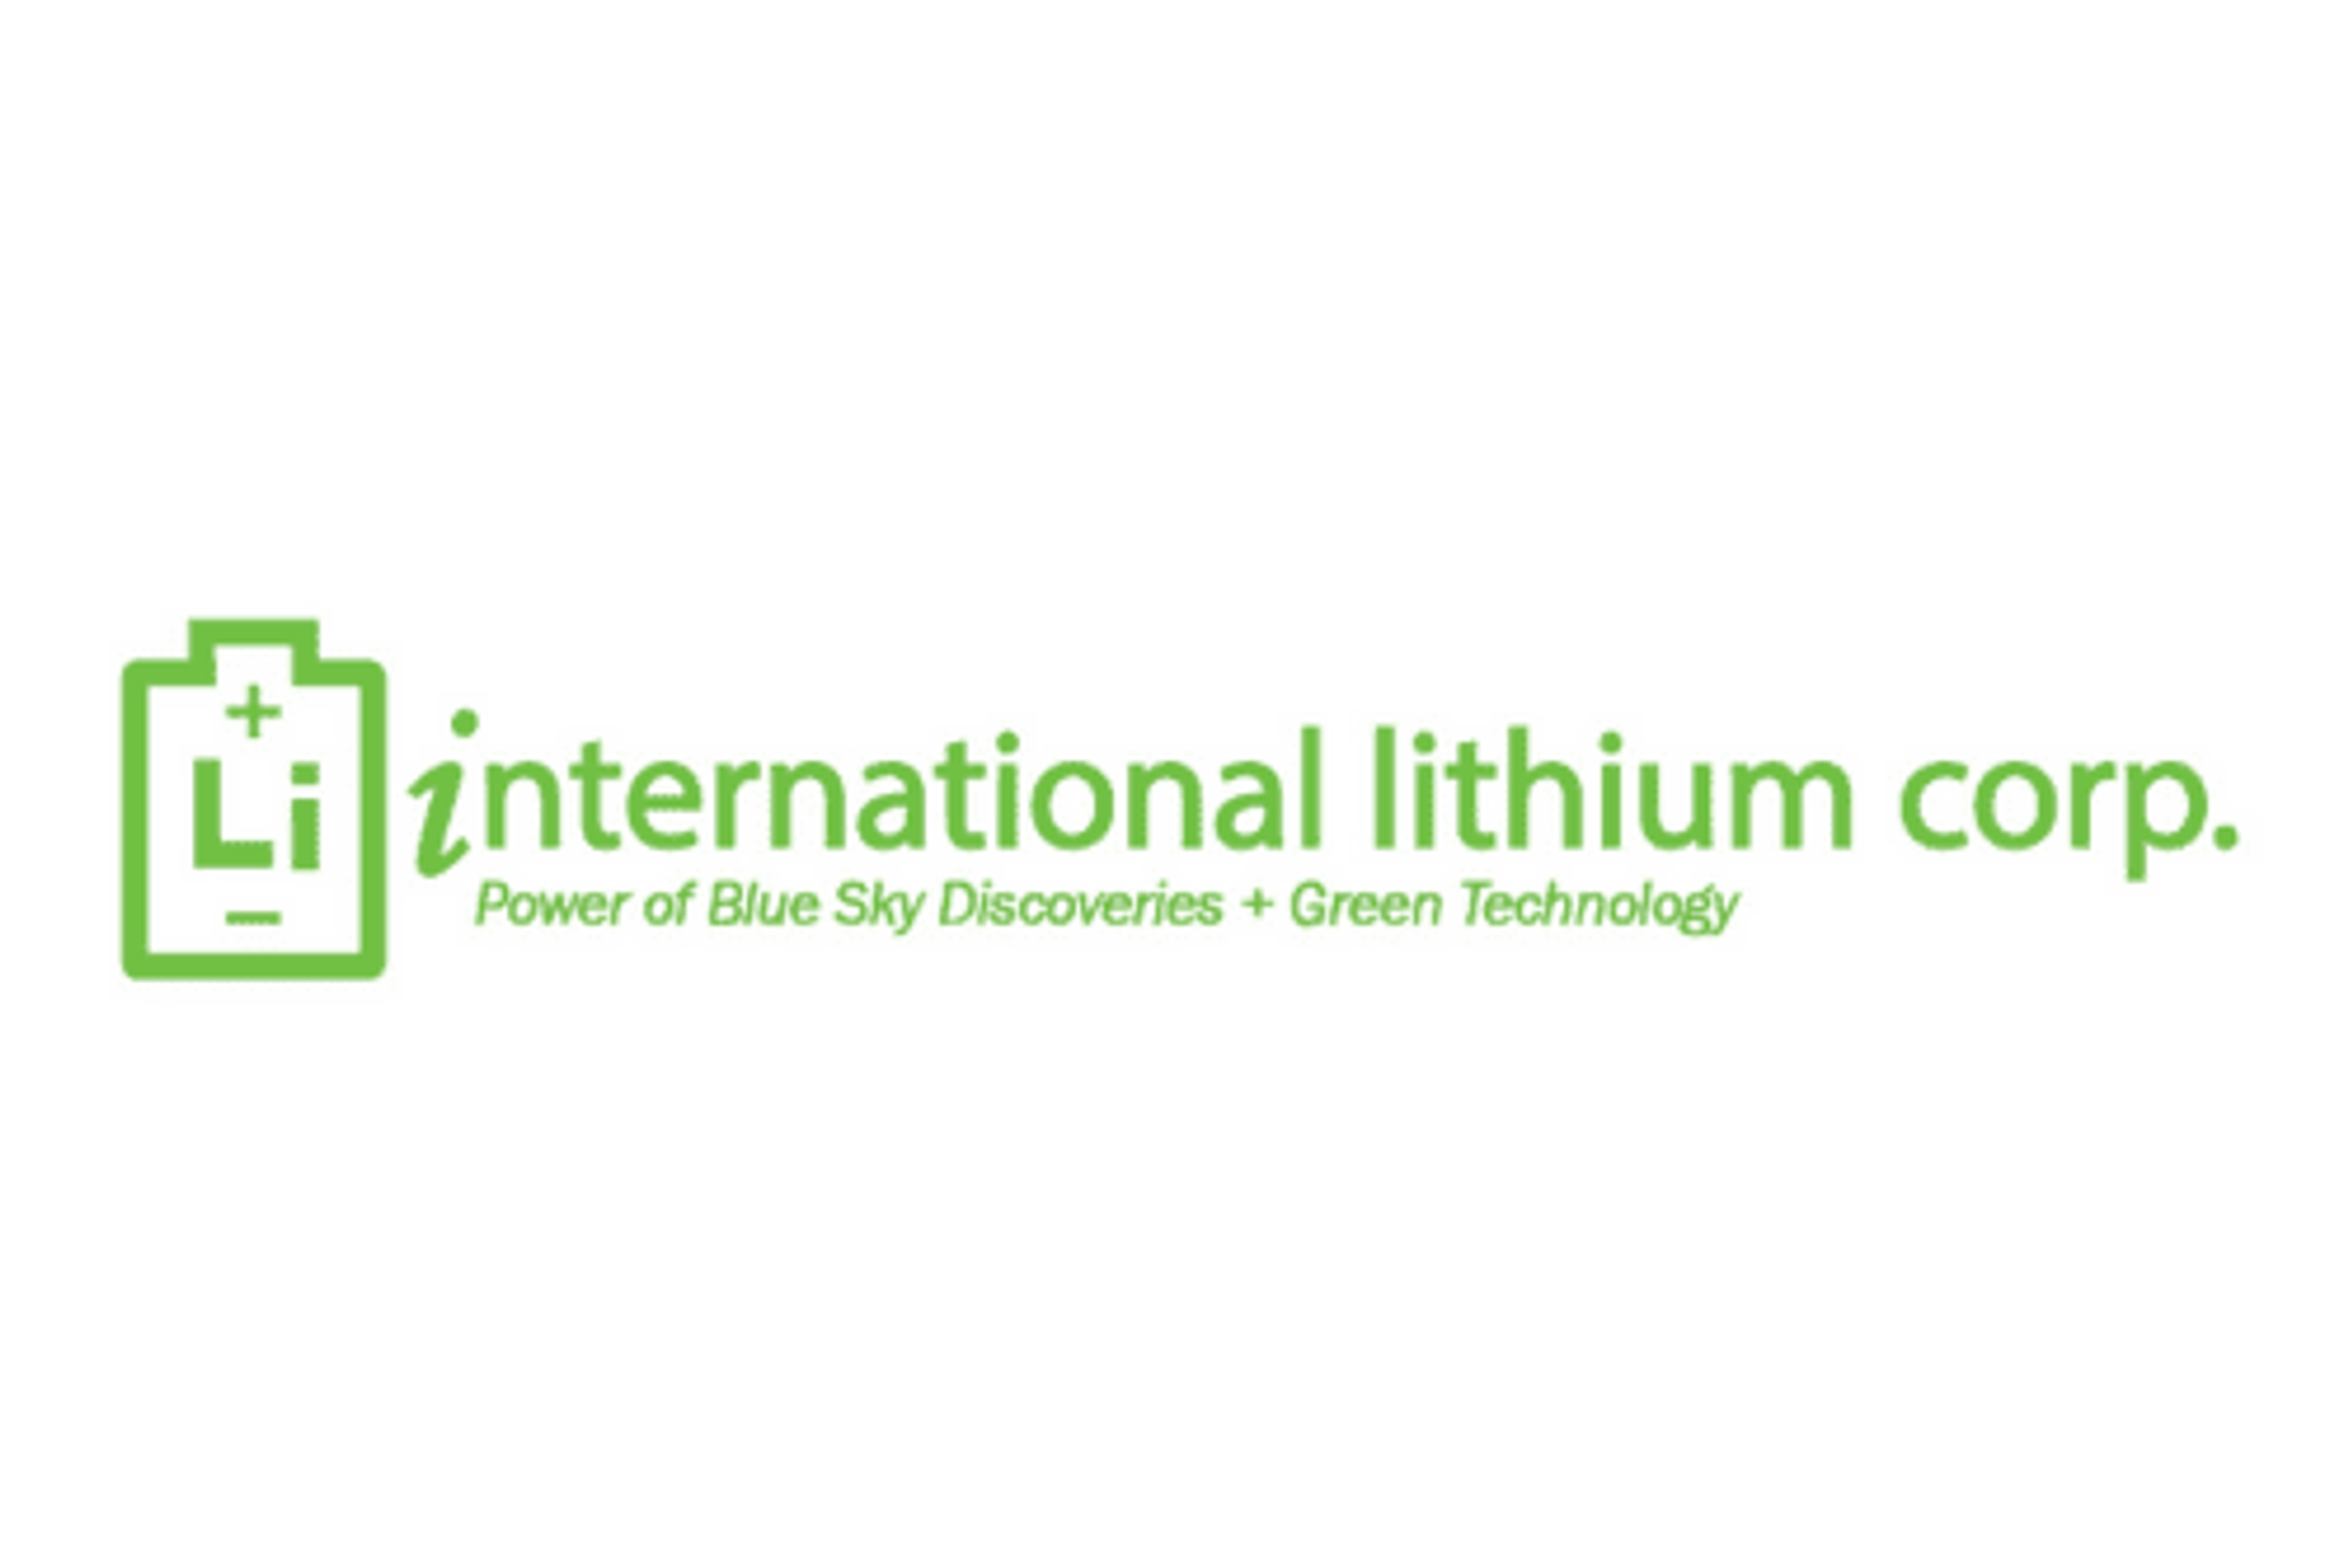 International Lithium Corp. Reports Results of 2021 Annual General Meeting